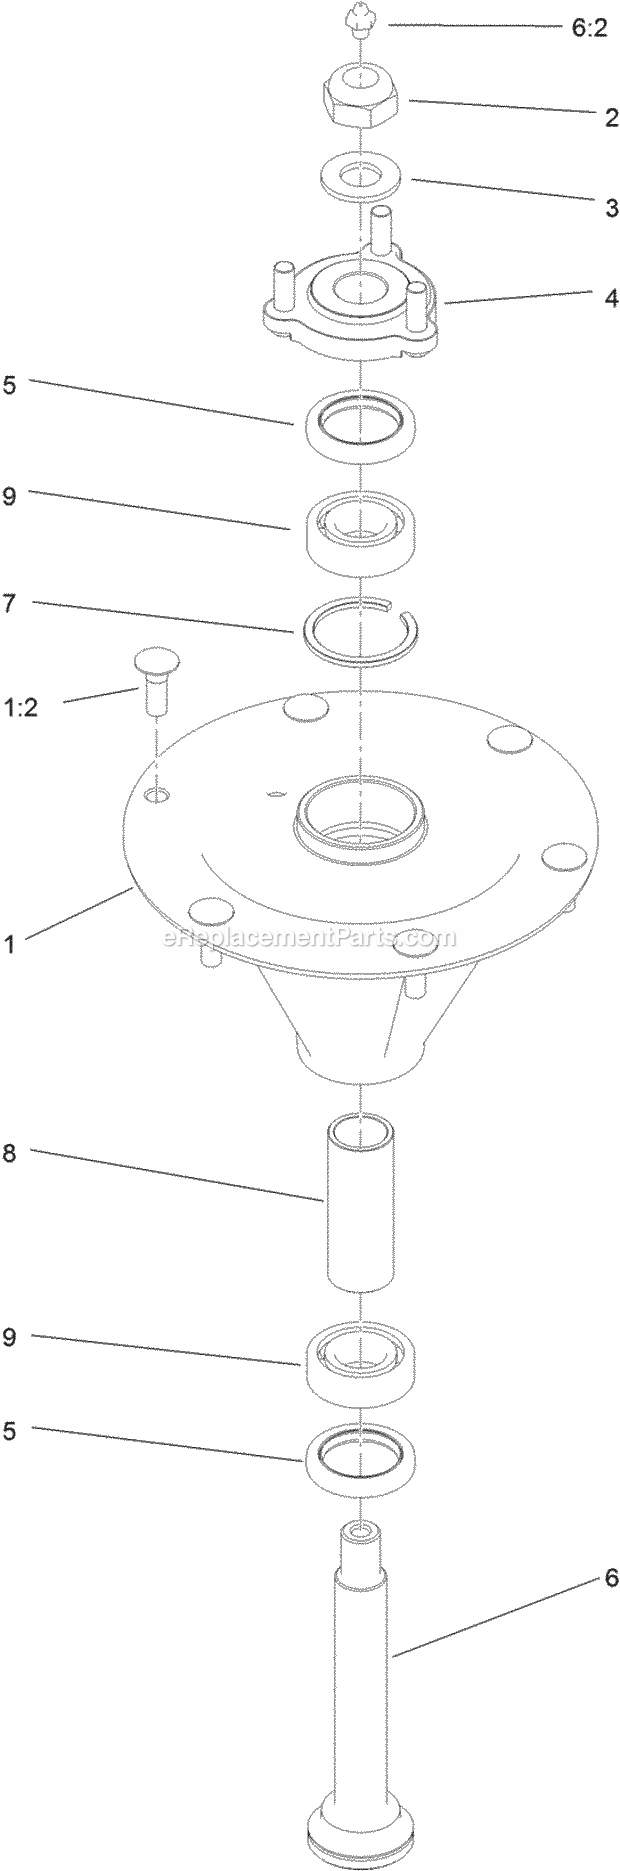 Toro 74575 (315000001-315999999) Grandstand Mower, With 52in Turbo Force Cutting Unit, 2015 Spindle Assembly No. 119-8560 Diagram